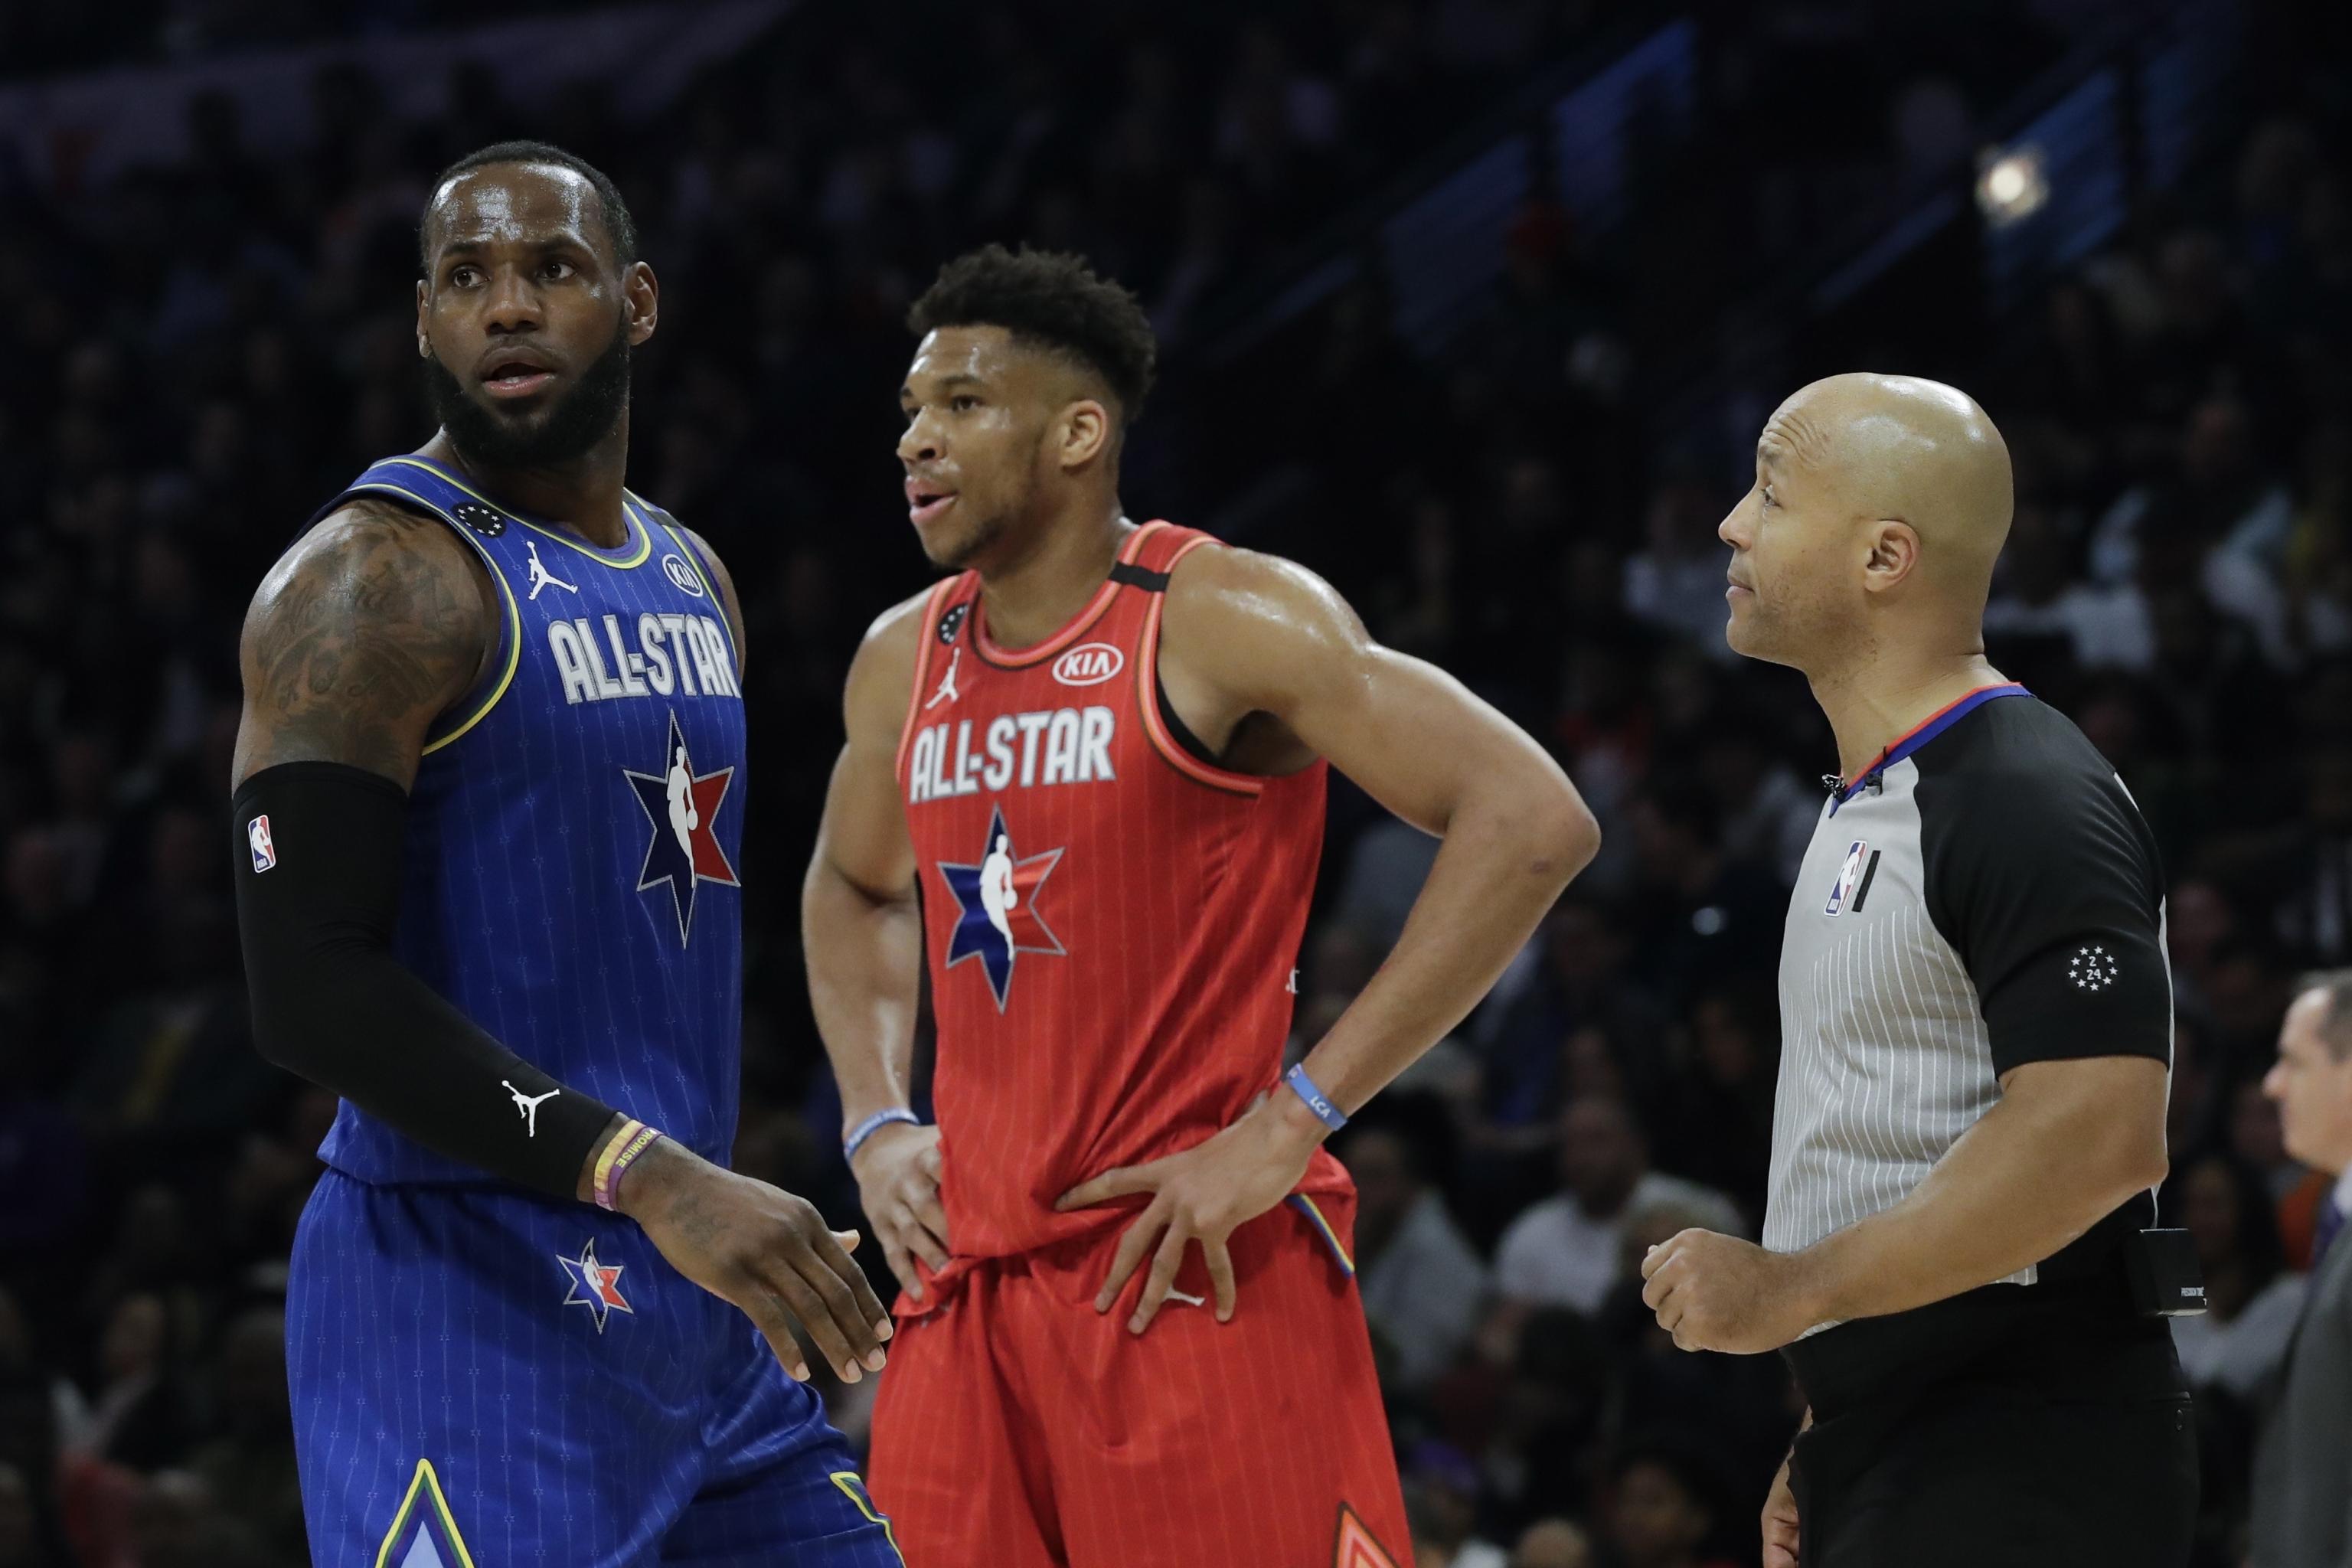 NBA All-Star Game 2021: Team LeBron wins, but HBCUs were the real